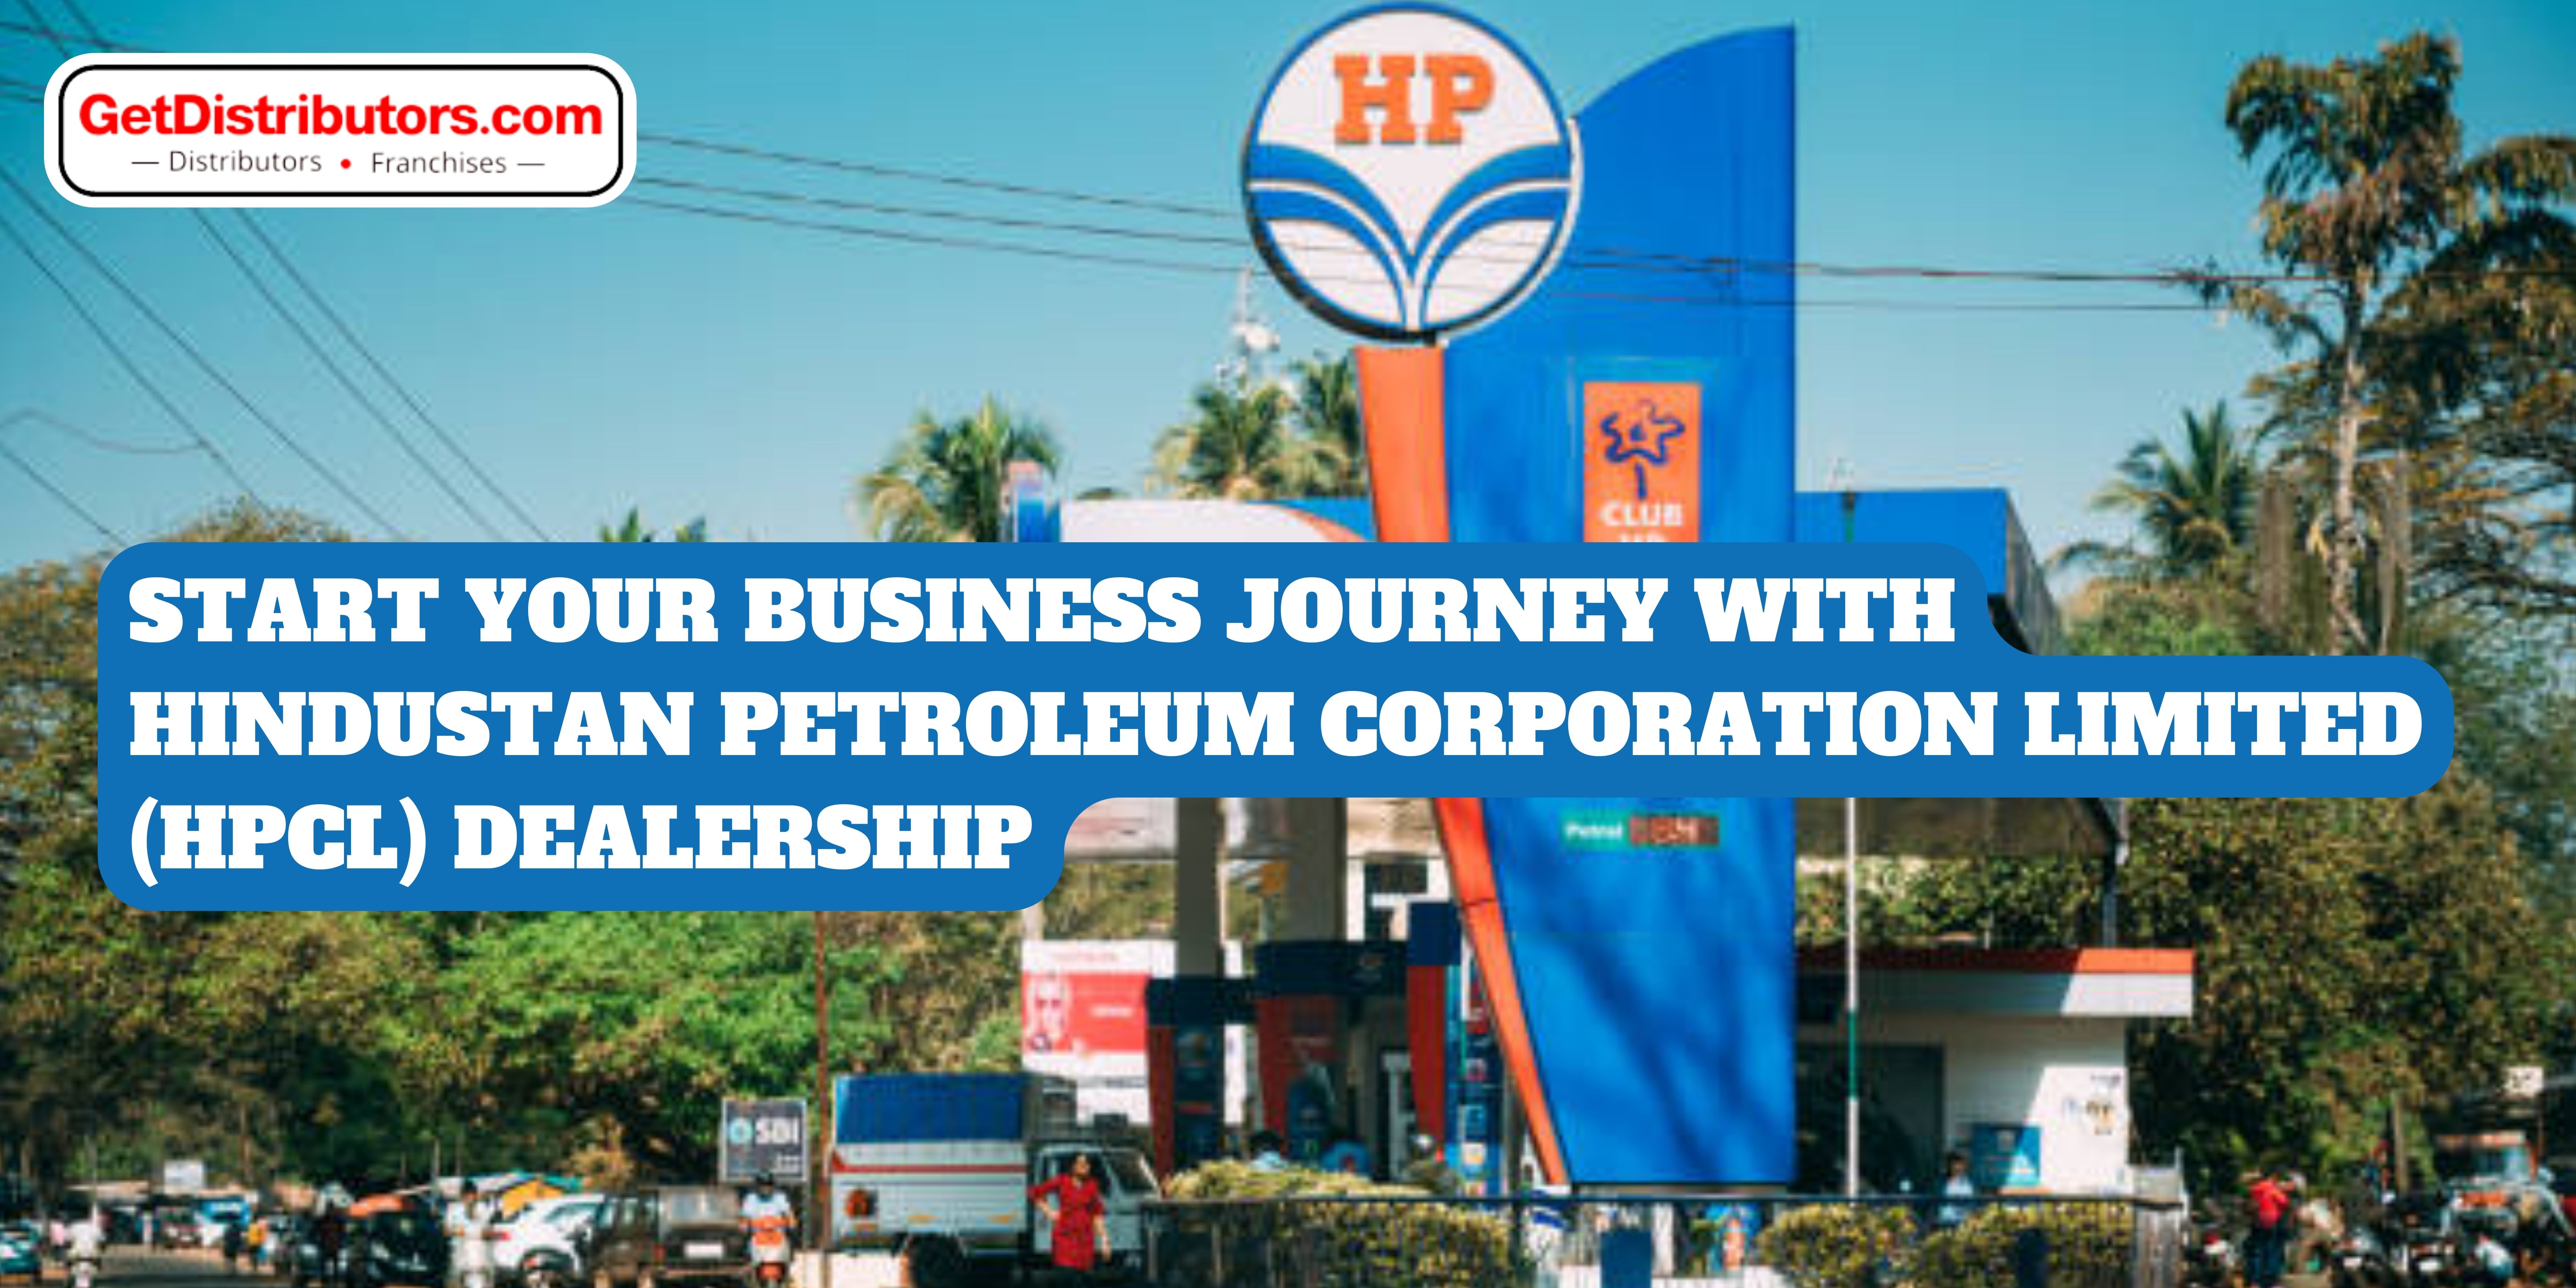 Start Your Business Journey with Hindustan Petroleum Corporation Limited (HPCL) Dealership